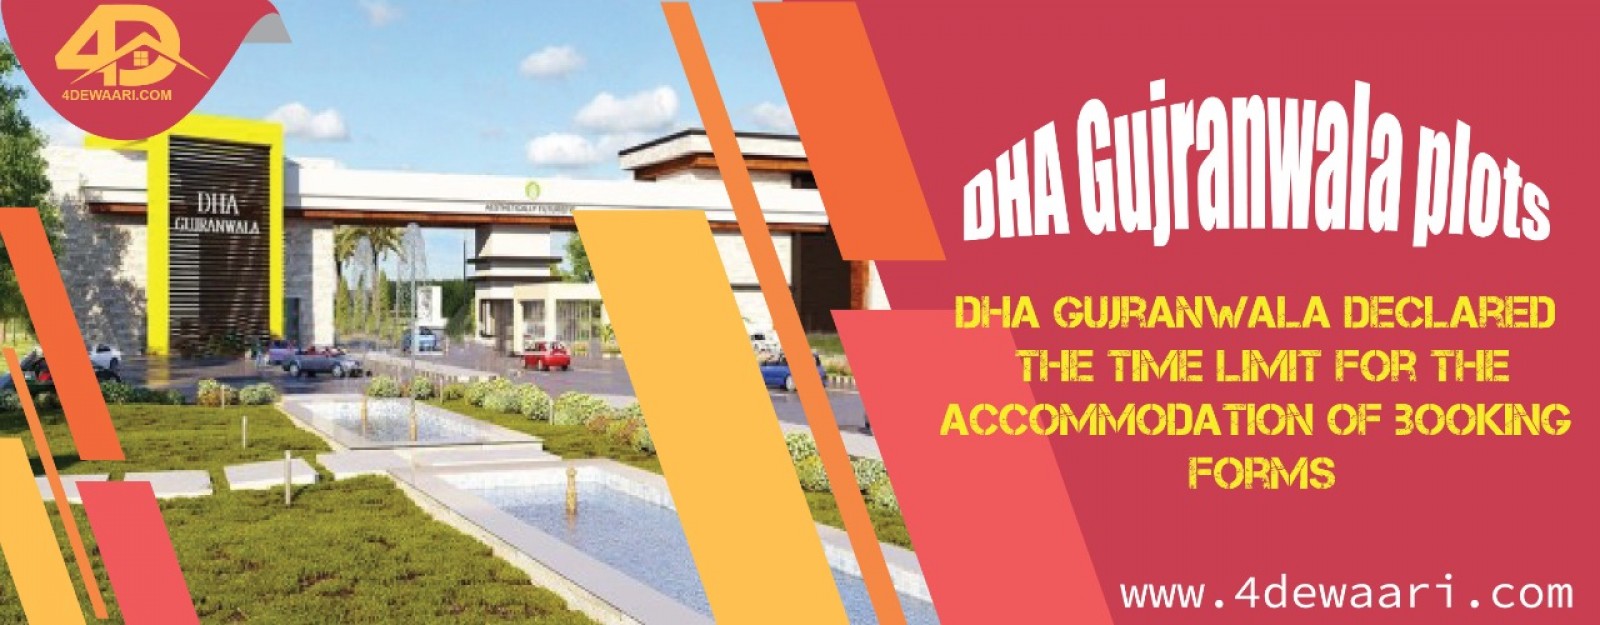 DHA Gujranwala Declared The Time Limit For The Accommodation Of Booking Forms